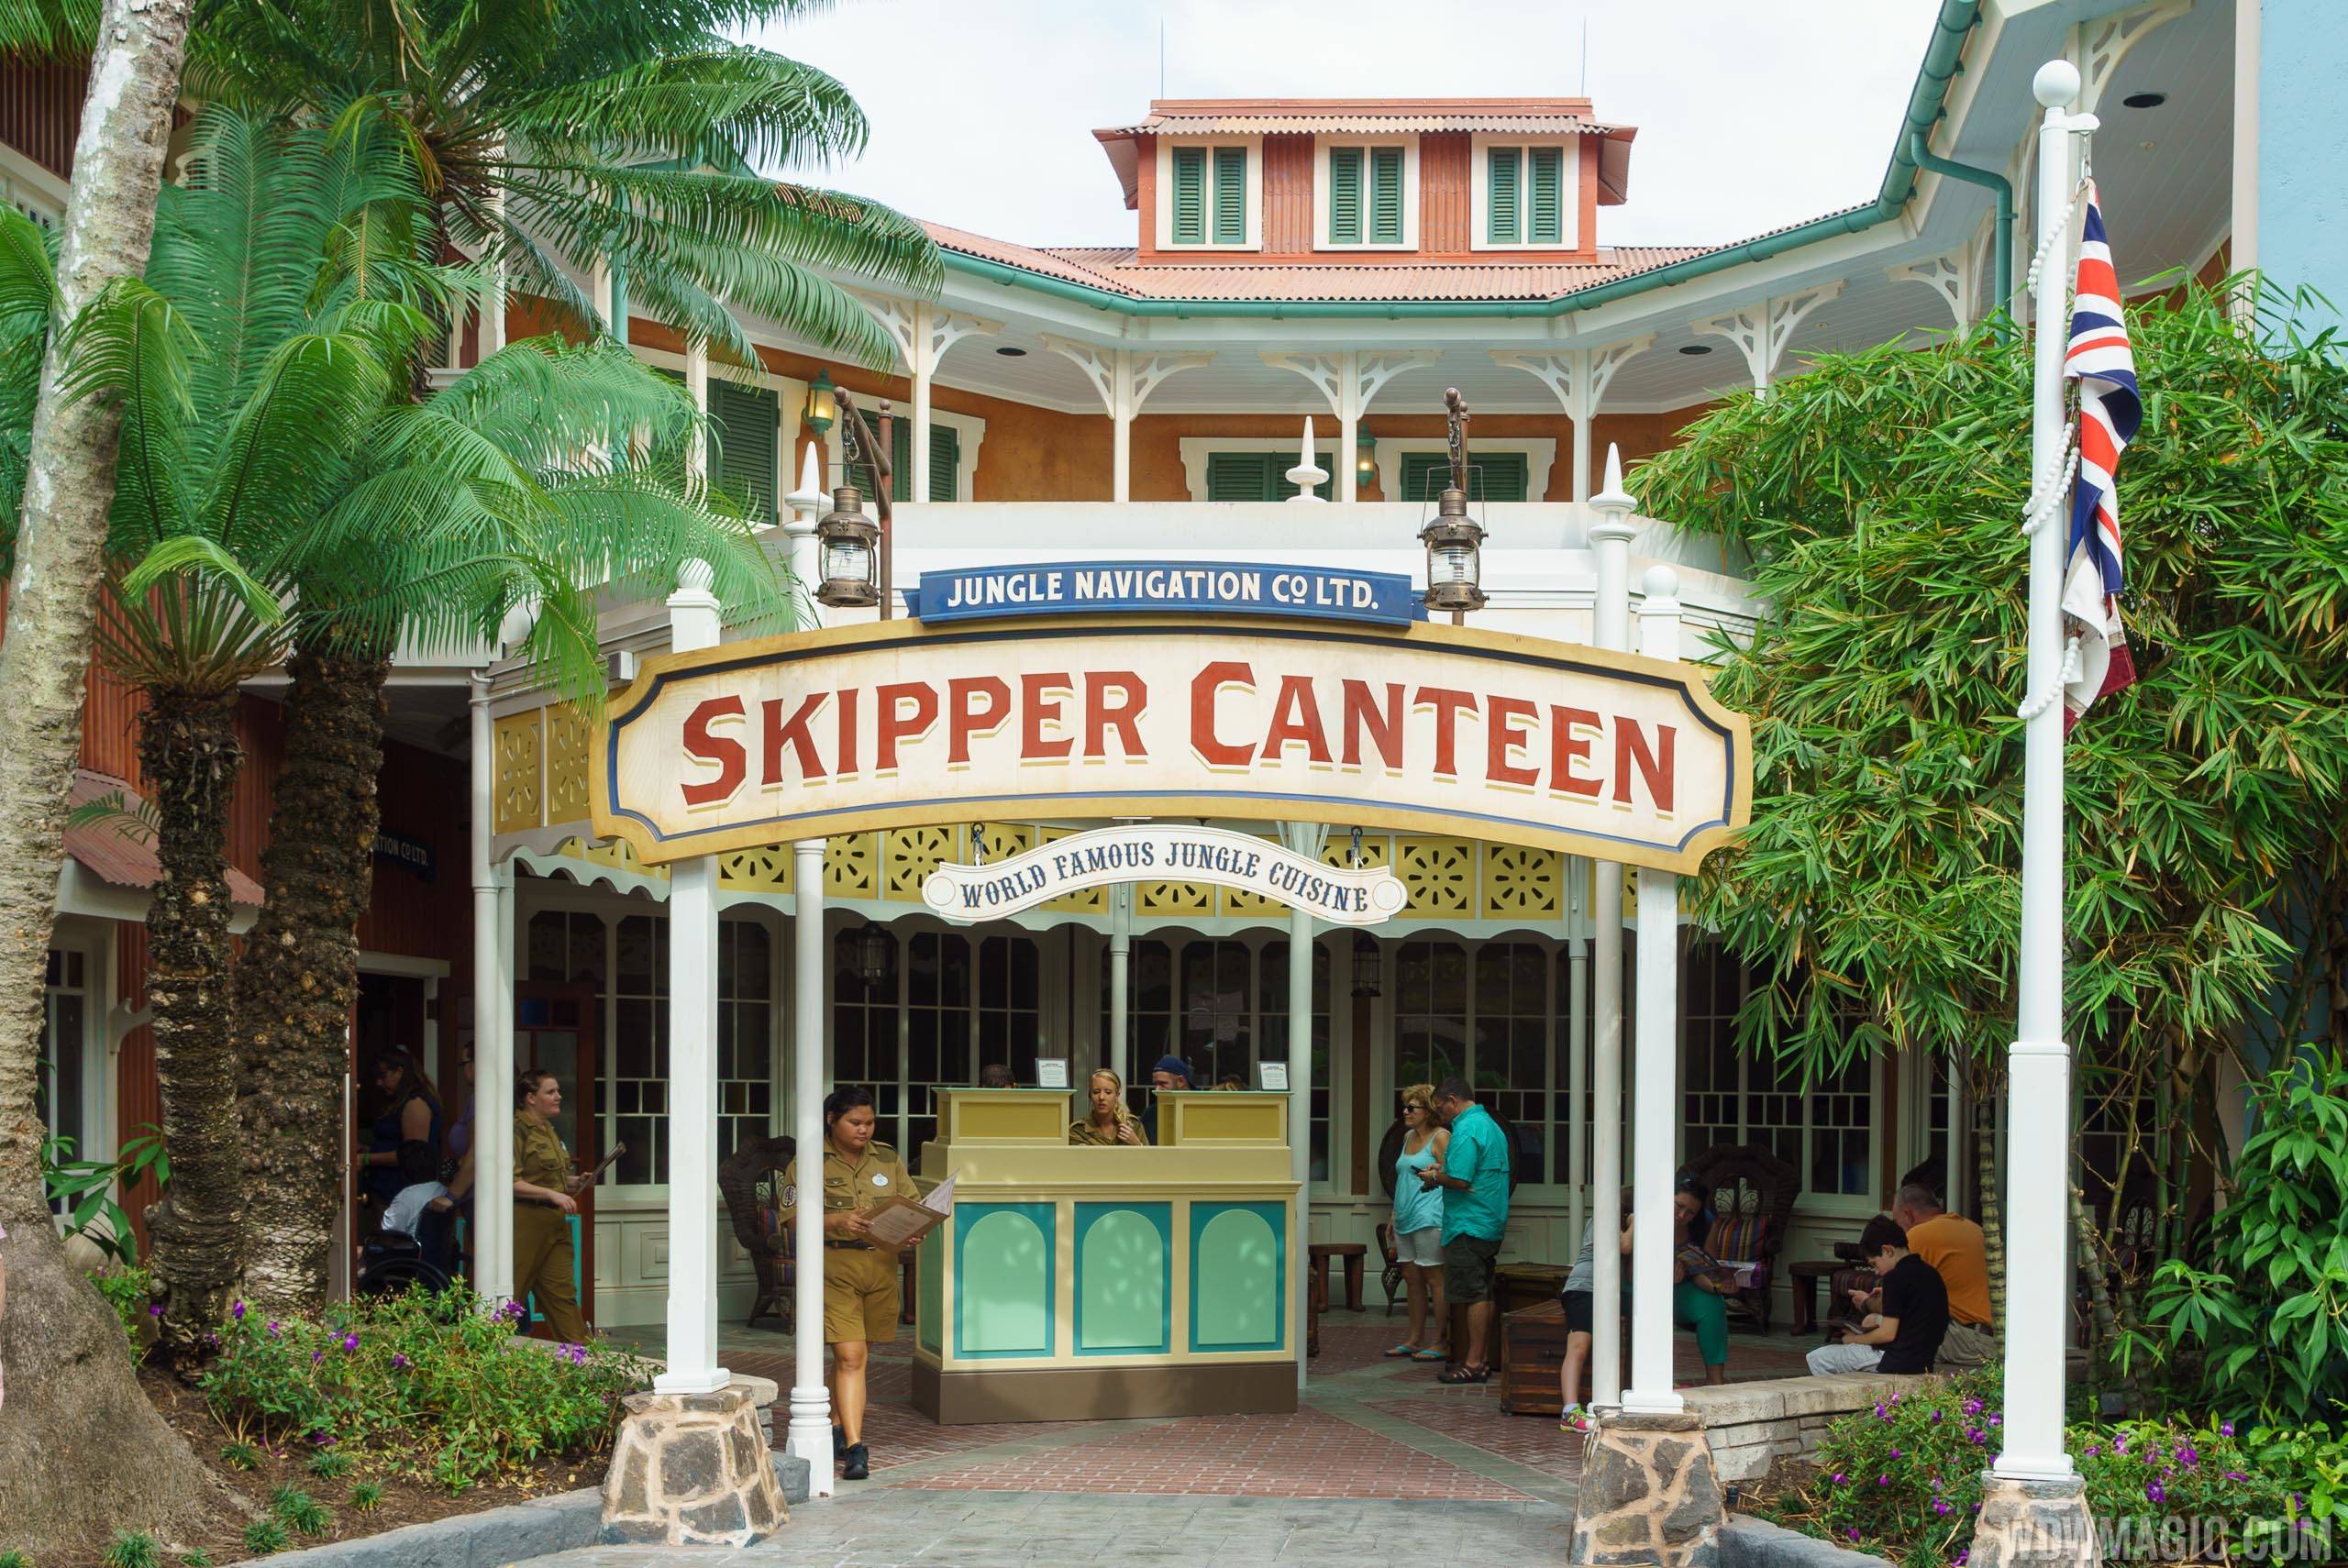 Advance reservations at Jungle Cruise Skipper Canteen to begin soon